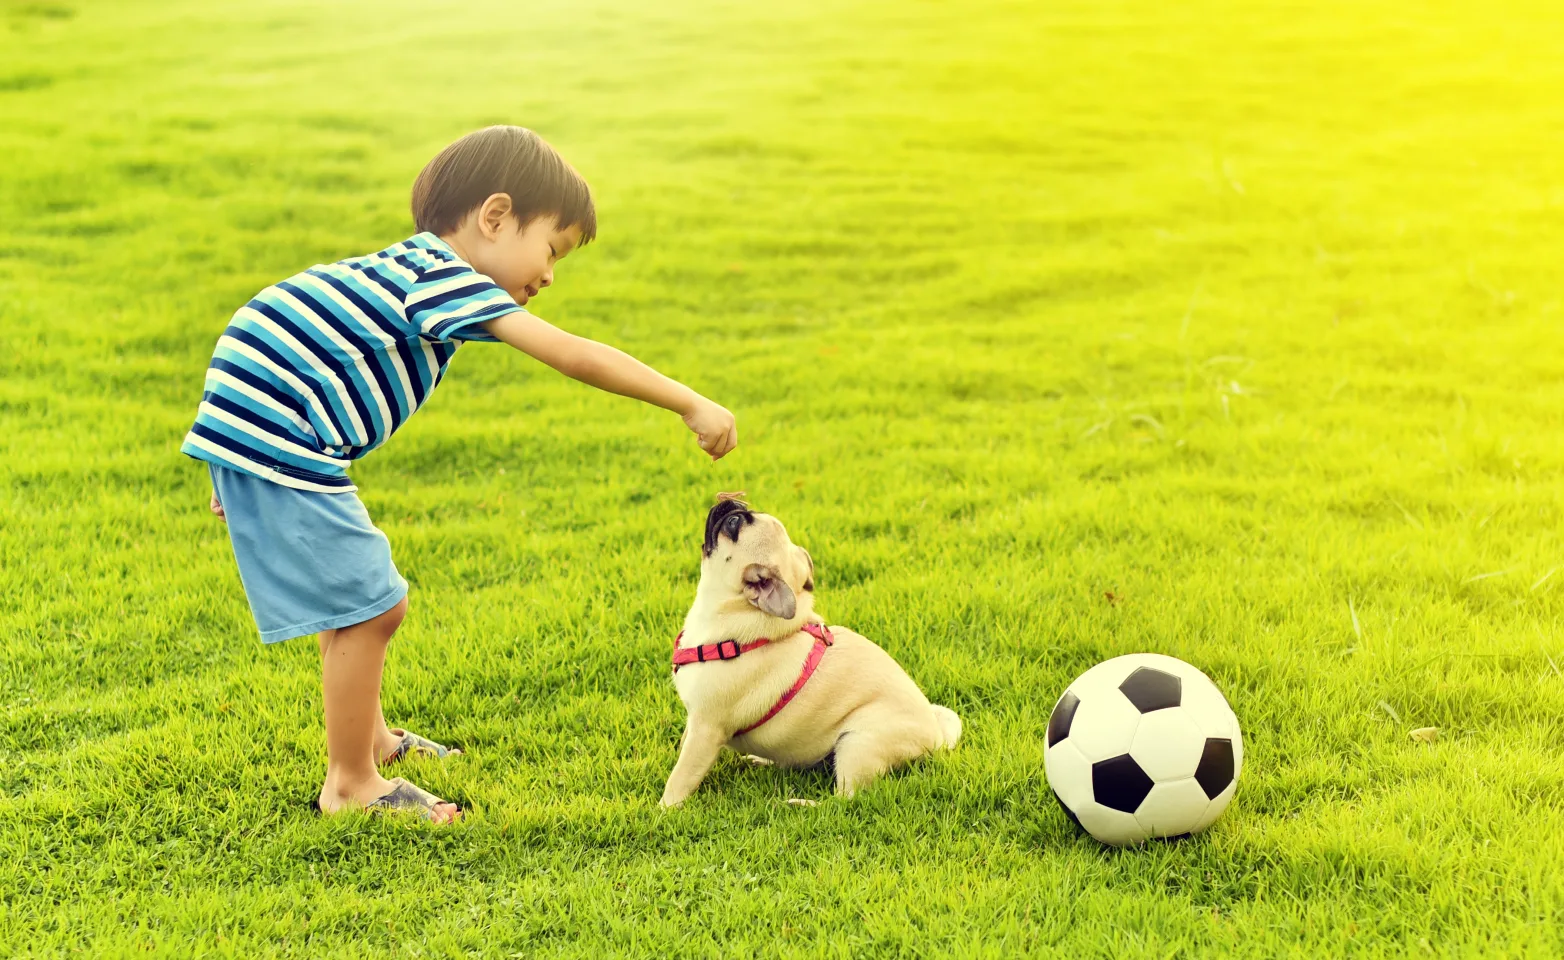 Boy on lawn playing with a dog and soccer ball